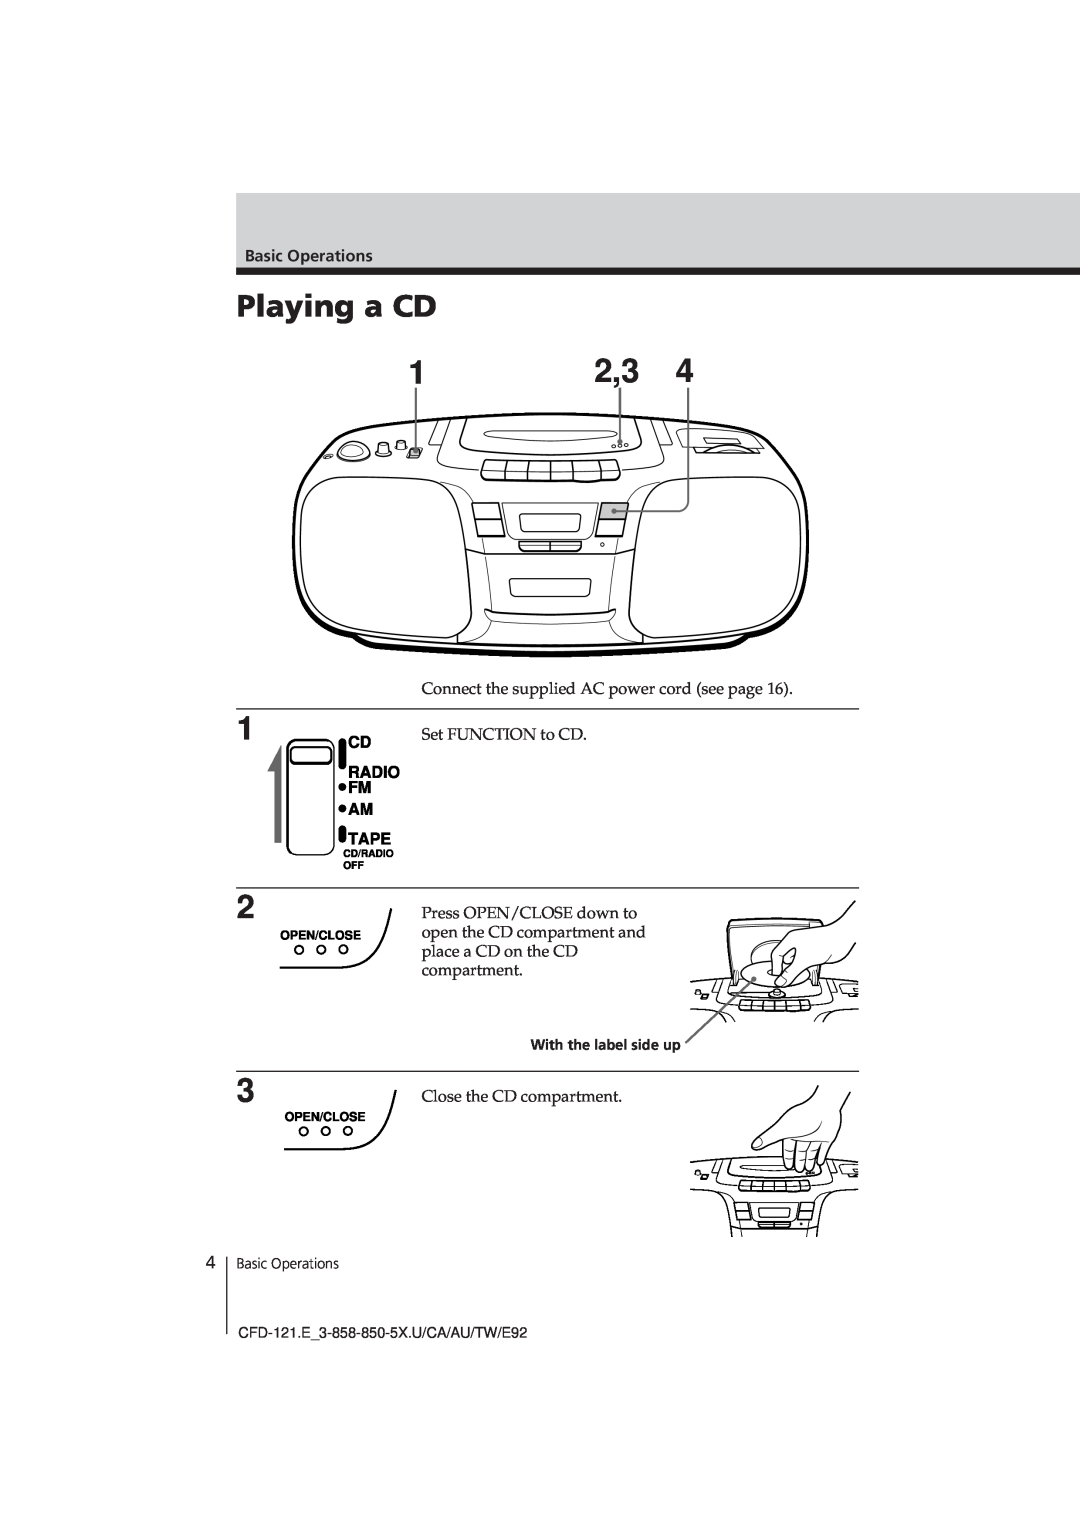 Sony CFD-121 manual Playing a CD, Basic Operations, Close the CD compartment, With the label side up 